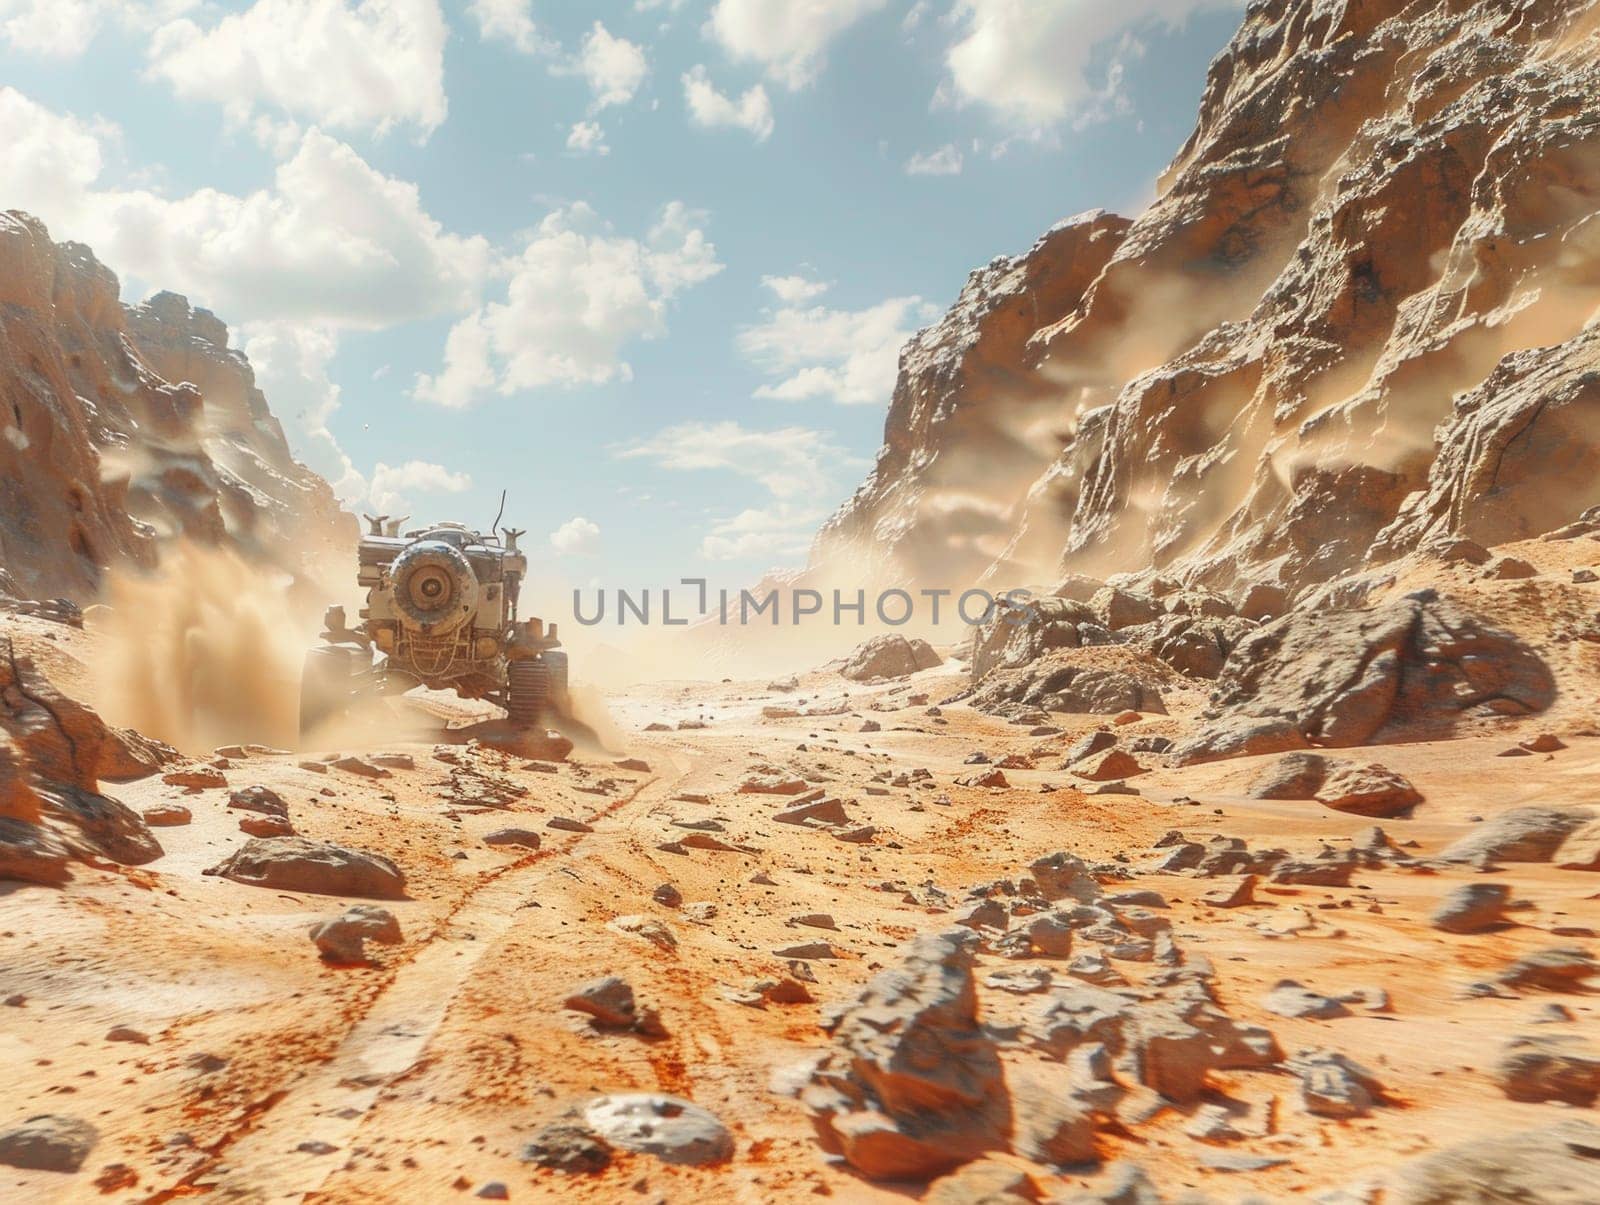 Large Truck Drives Through Rocky Desert by but_photo